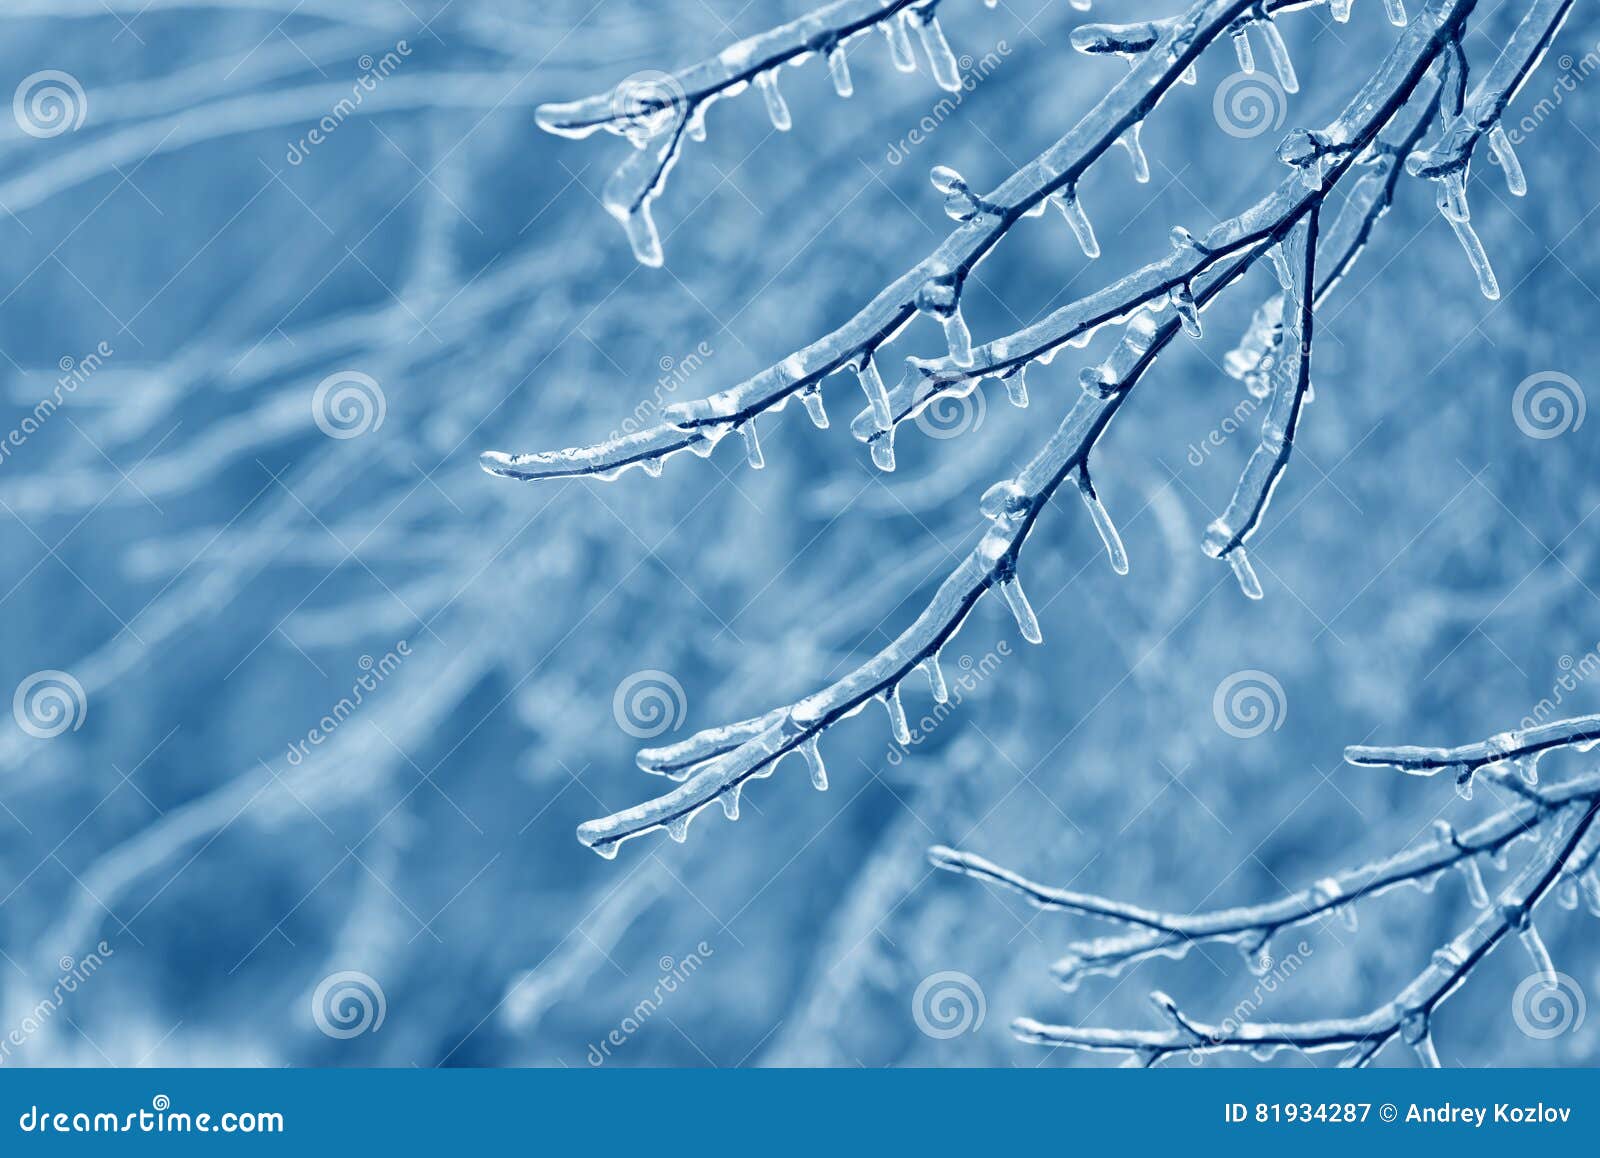 Tree Branches Frozen in the Ice. Frozen Tree Branch in Winter Forest ...